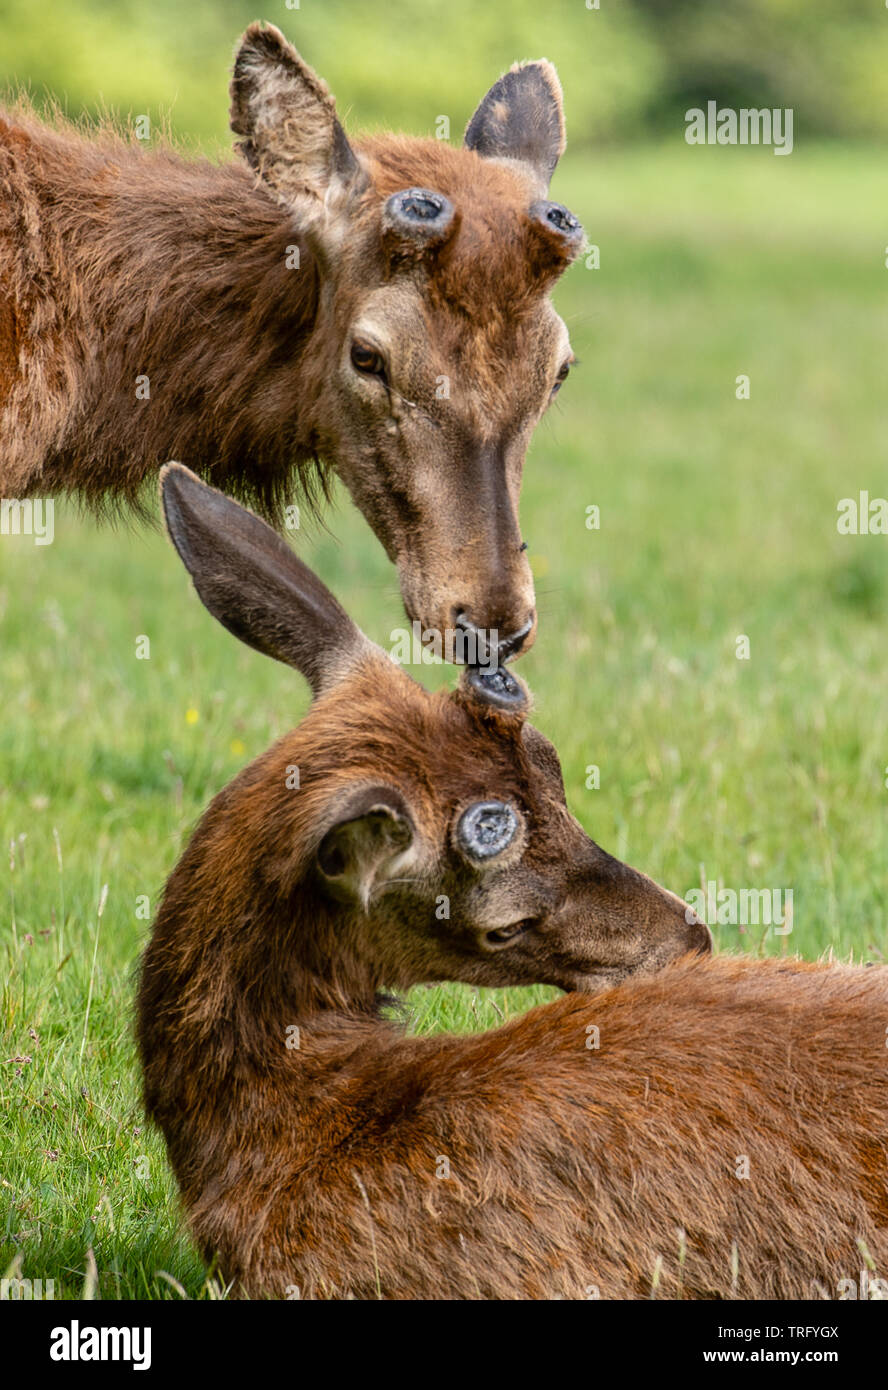 Young red deer stags Cervus elaphus offering mutual support after shedding antlers during regrowth and moulting phase in spring - Ashton Court Bristol Stock Photo